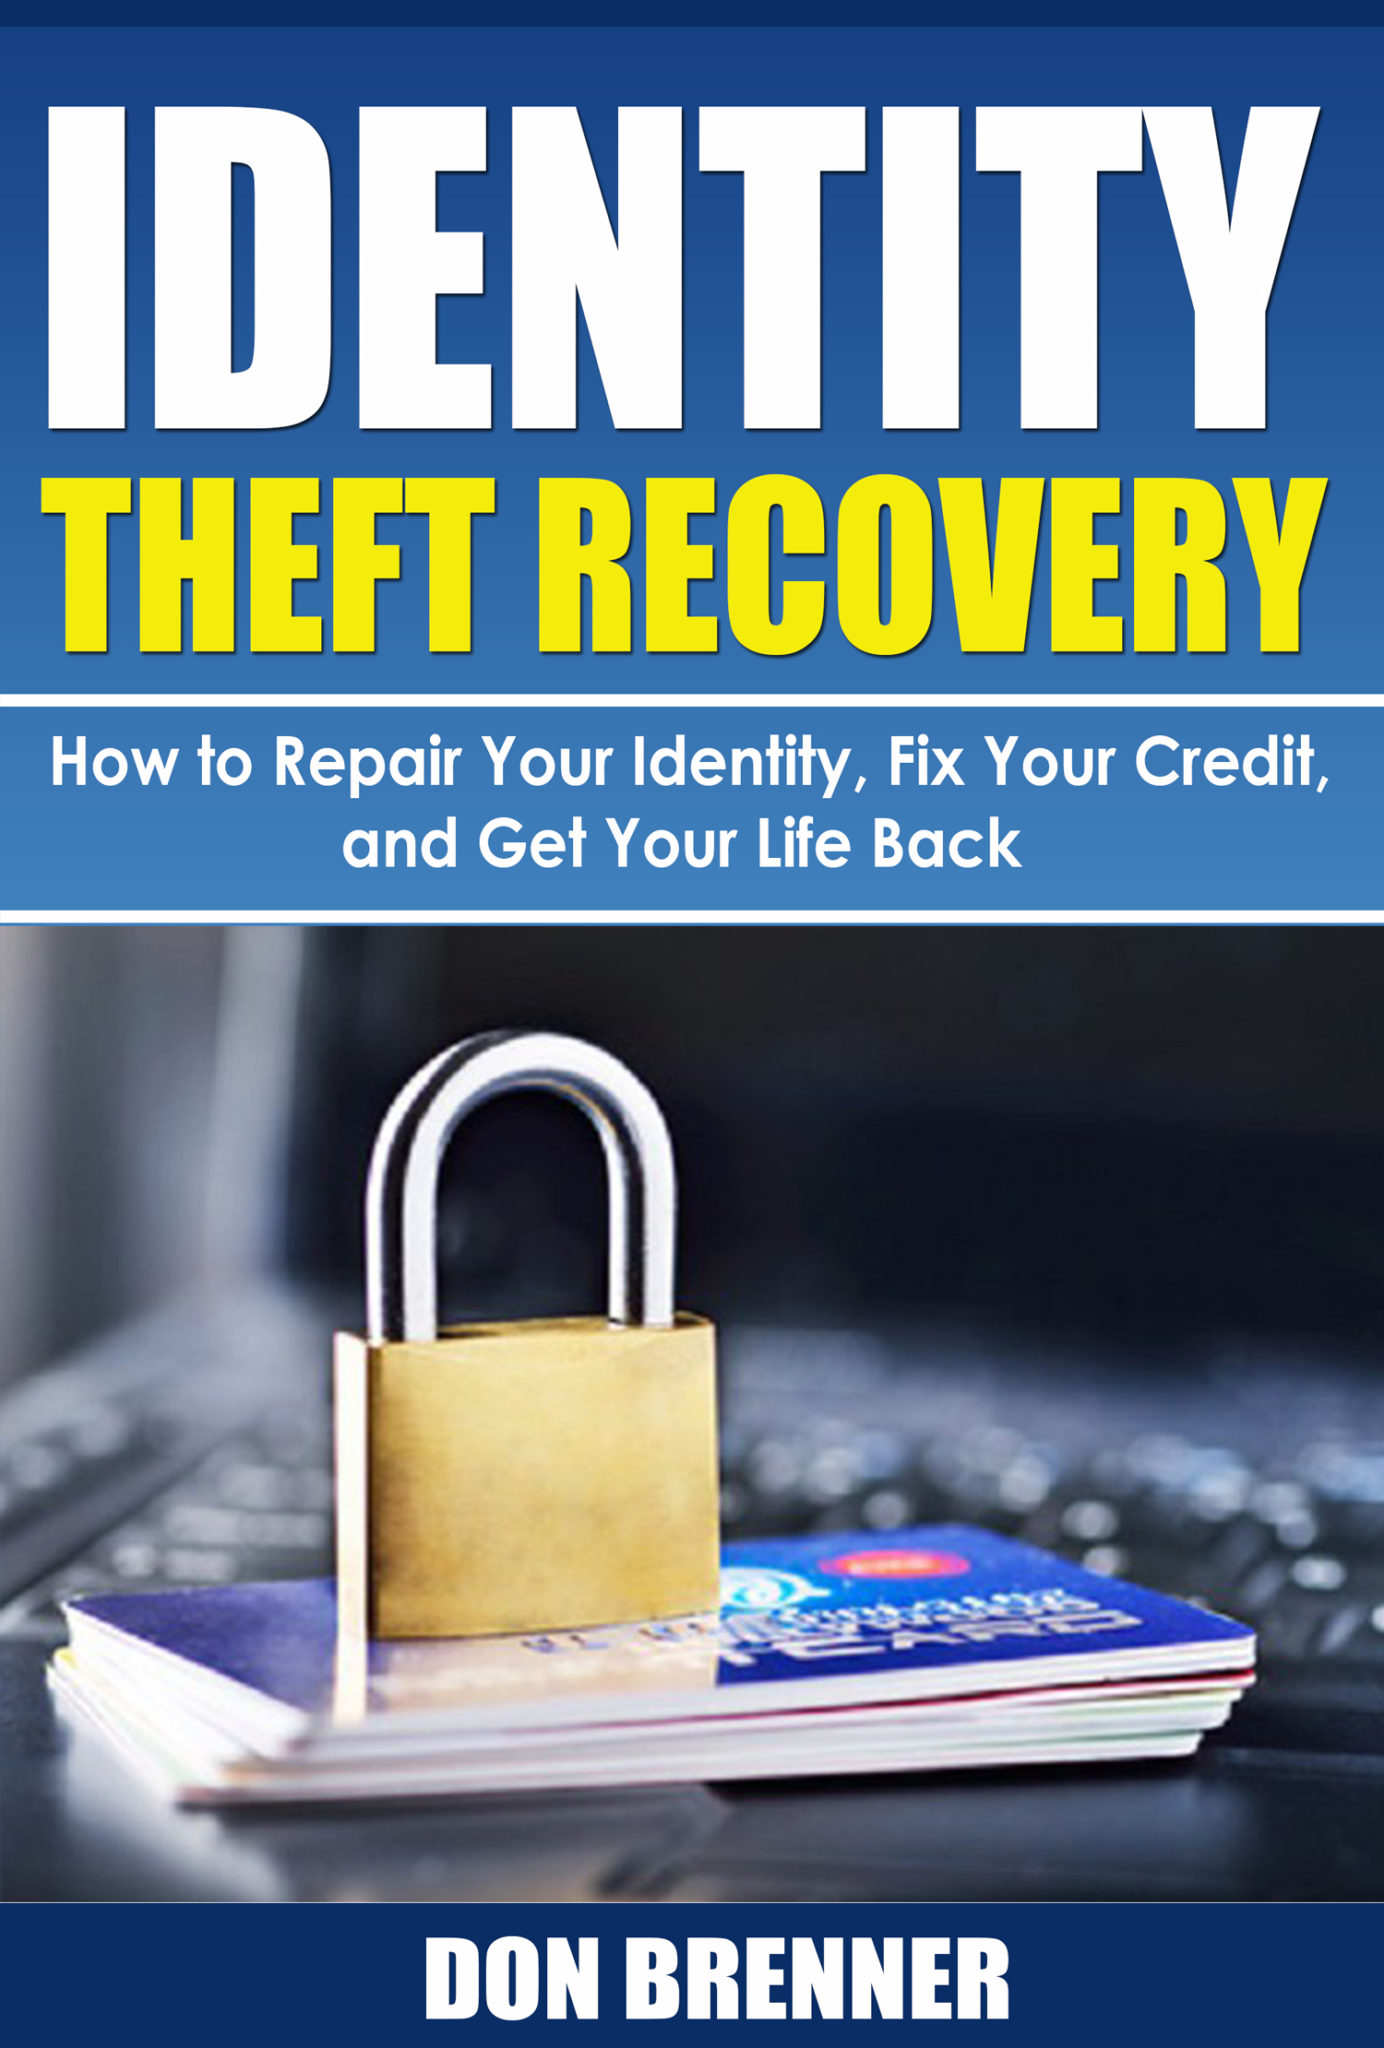 FREE: Identity Theft Recovery: How to Repair Your Identity, Fix Your Credit, and Get Your Life Back by Don Brenner